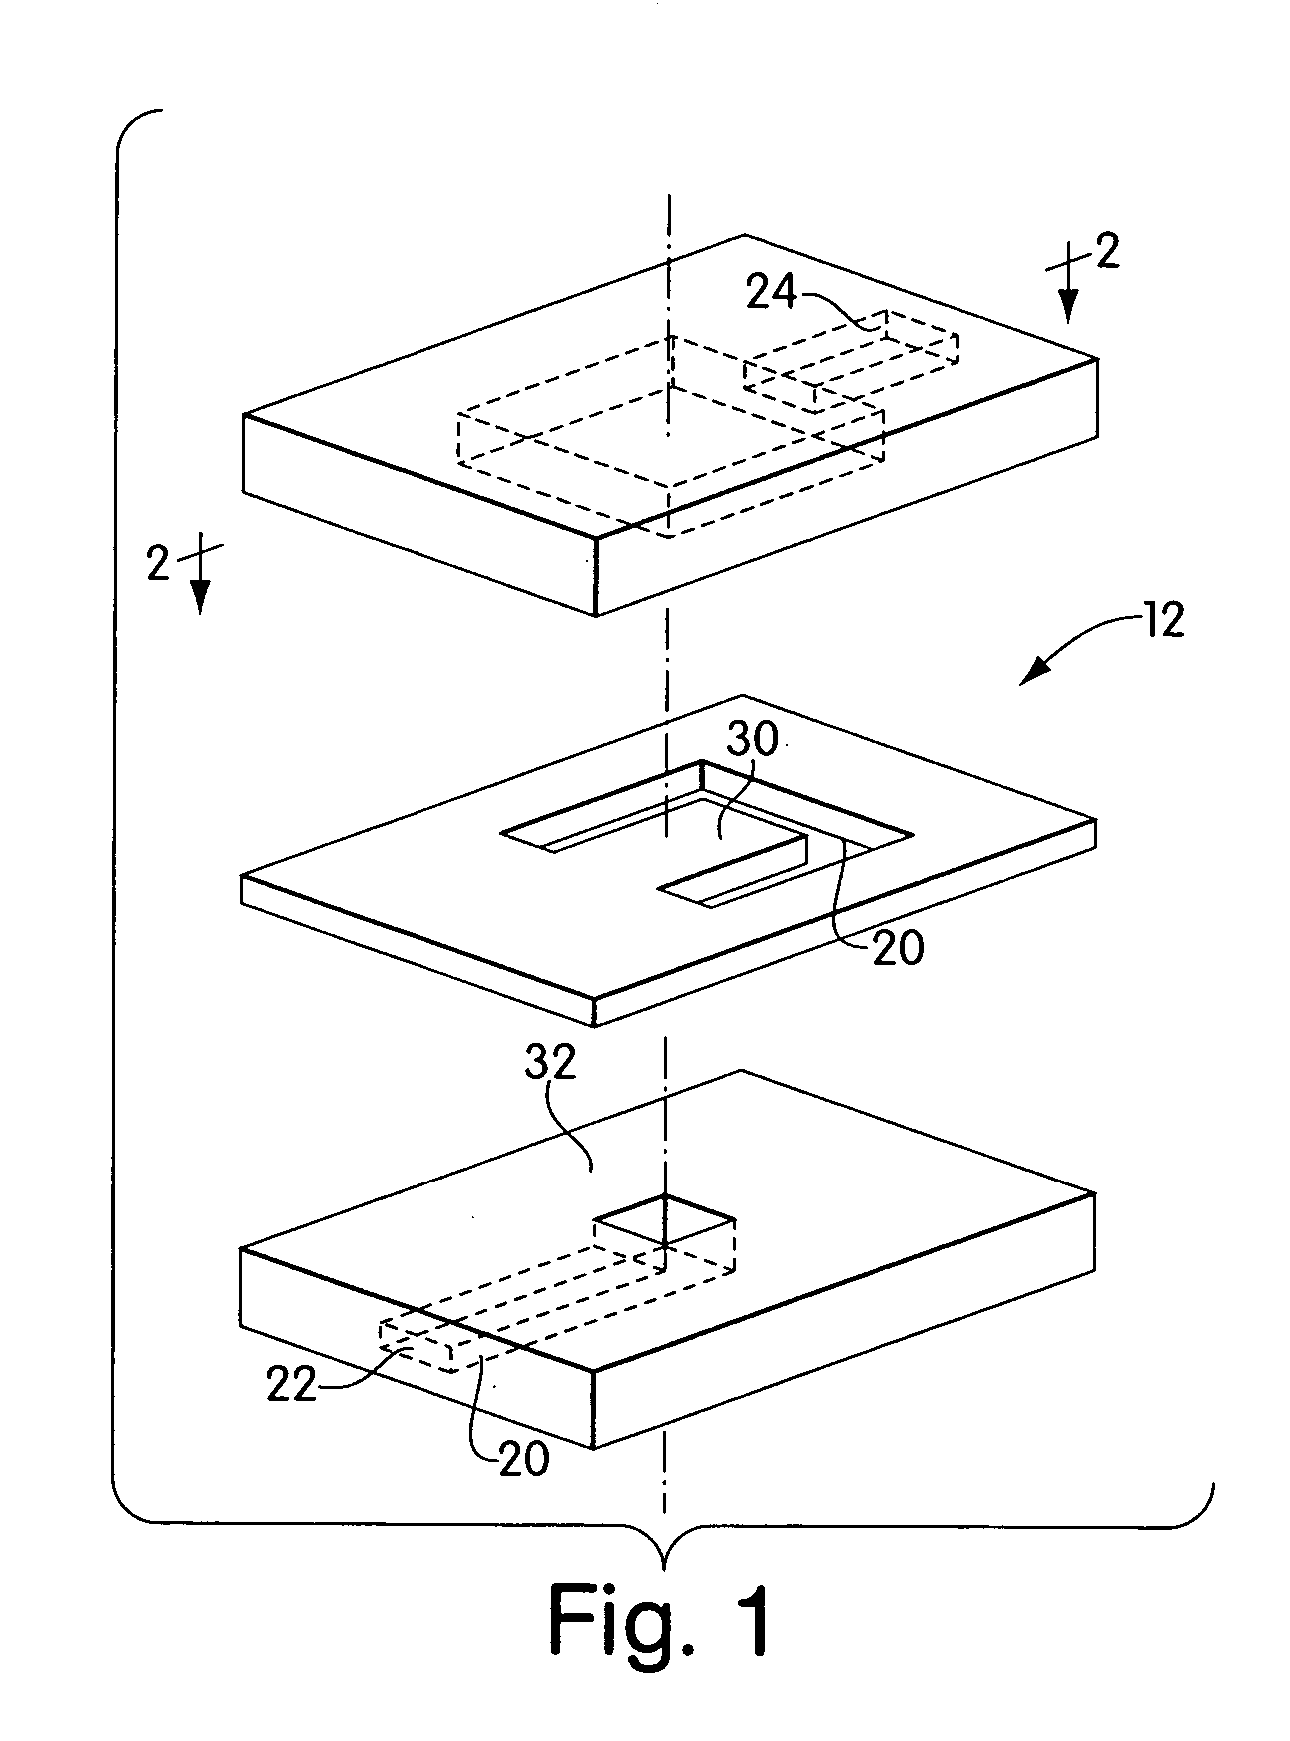 Valves and pumps for microfluidic systems and method for making microfluidic systems